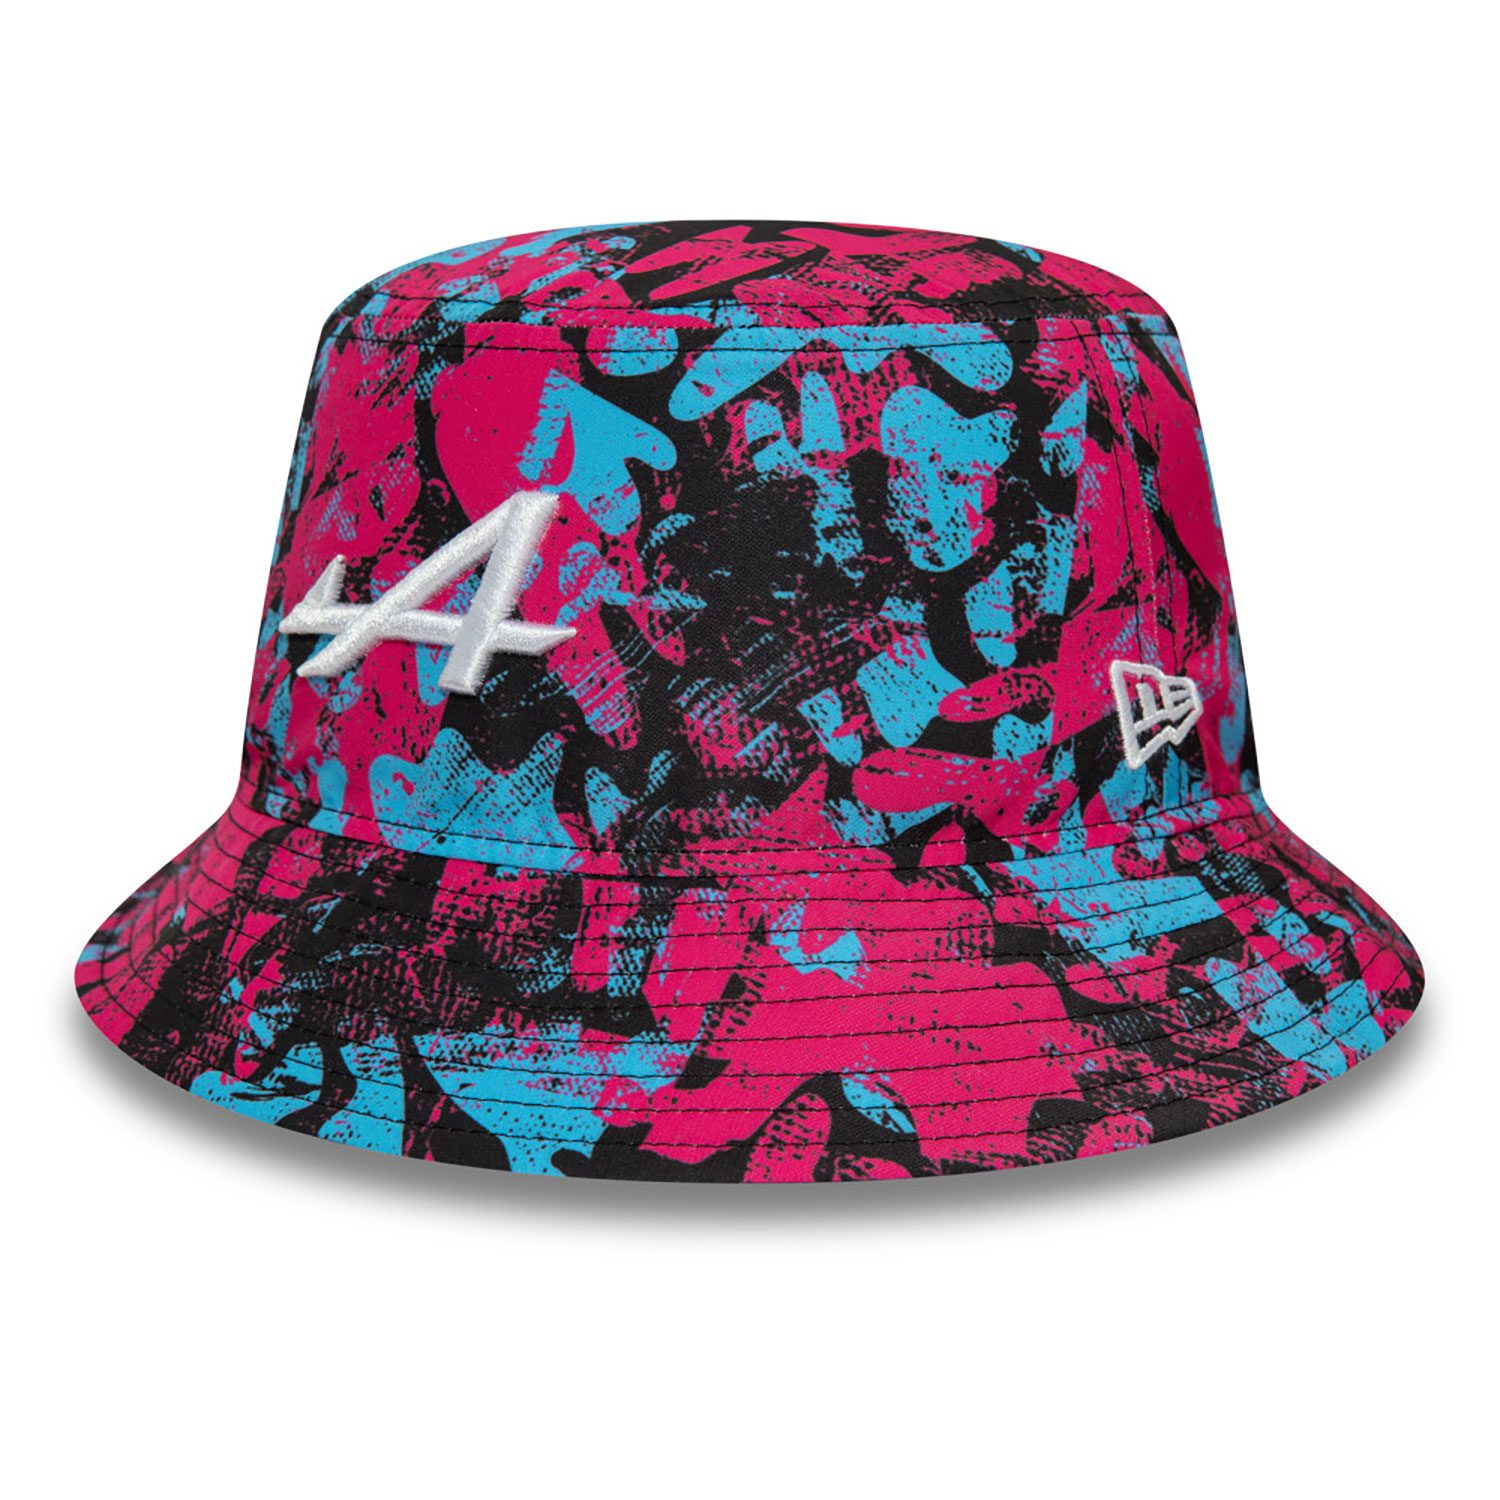 Alpine Racing Silverstone Race Special All Over Print Black Bucket Hat